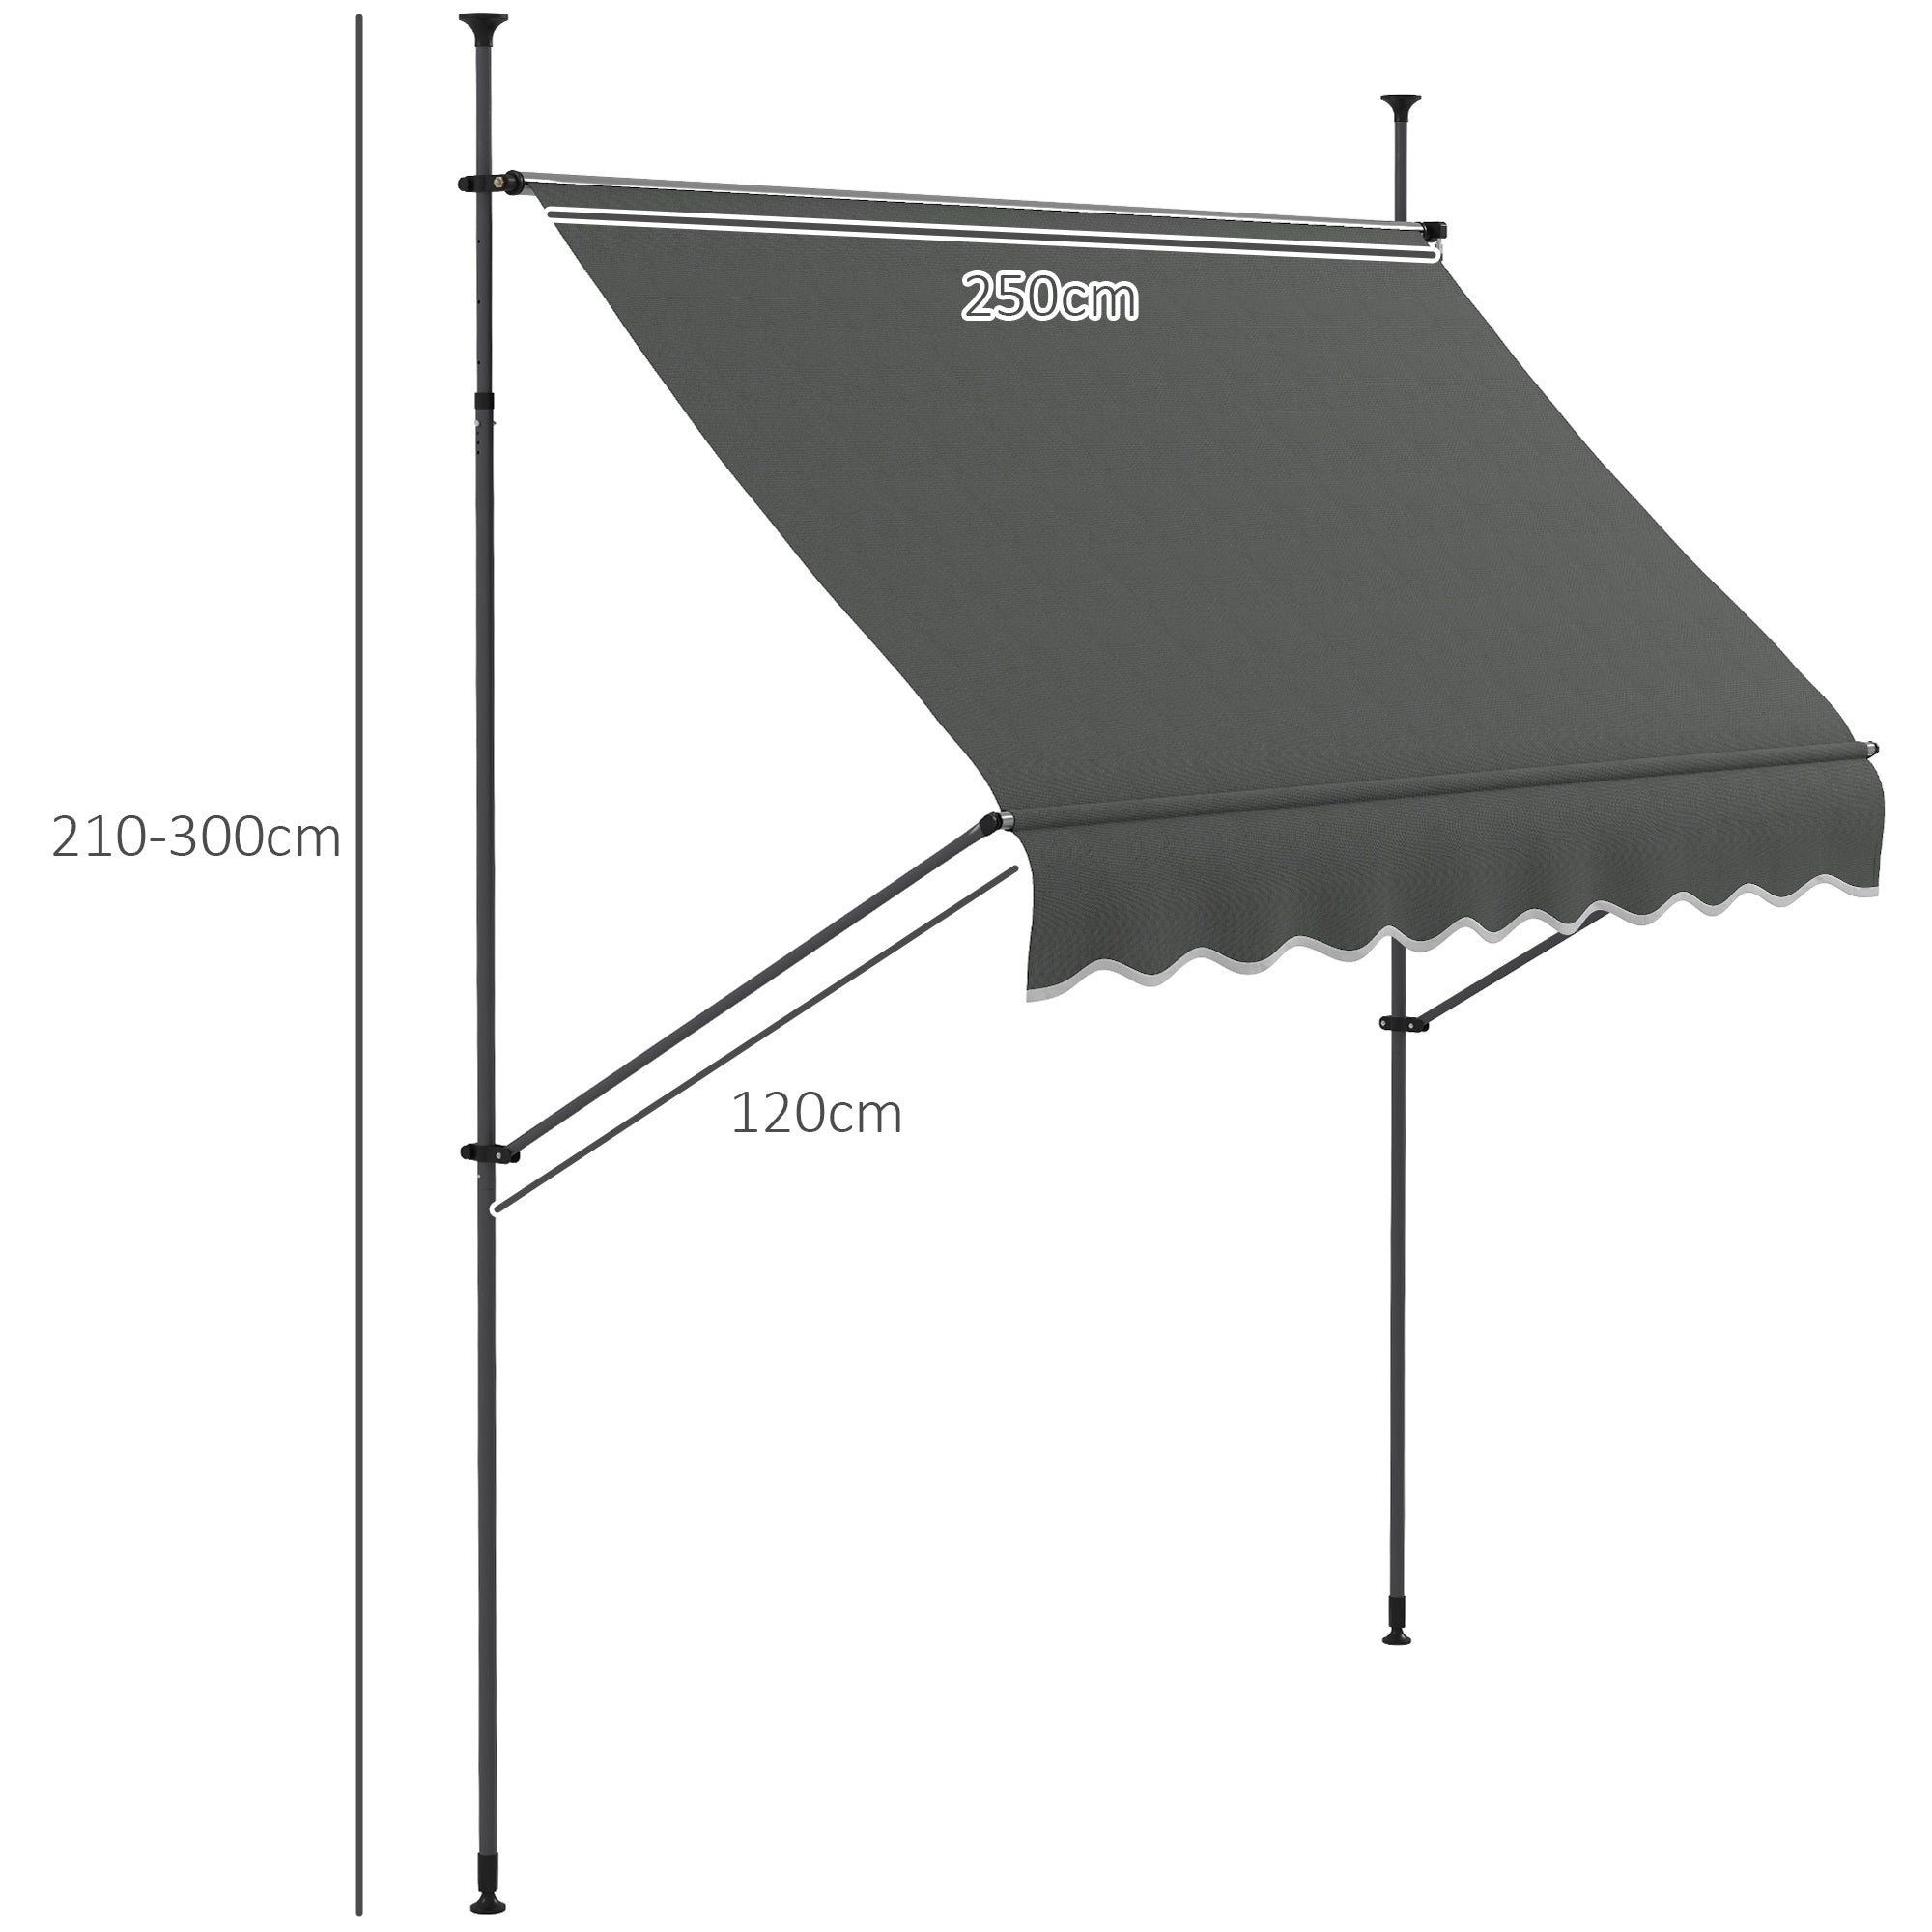 2.5 x 1.2m Retractable Awning, Free Standing Patio Sun Shade Shelter, UV Resistant, for Window and Door, Dark Grey